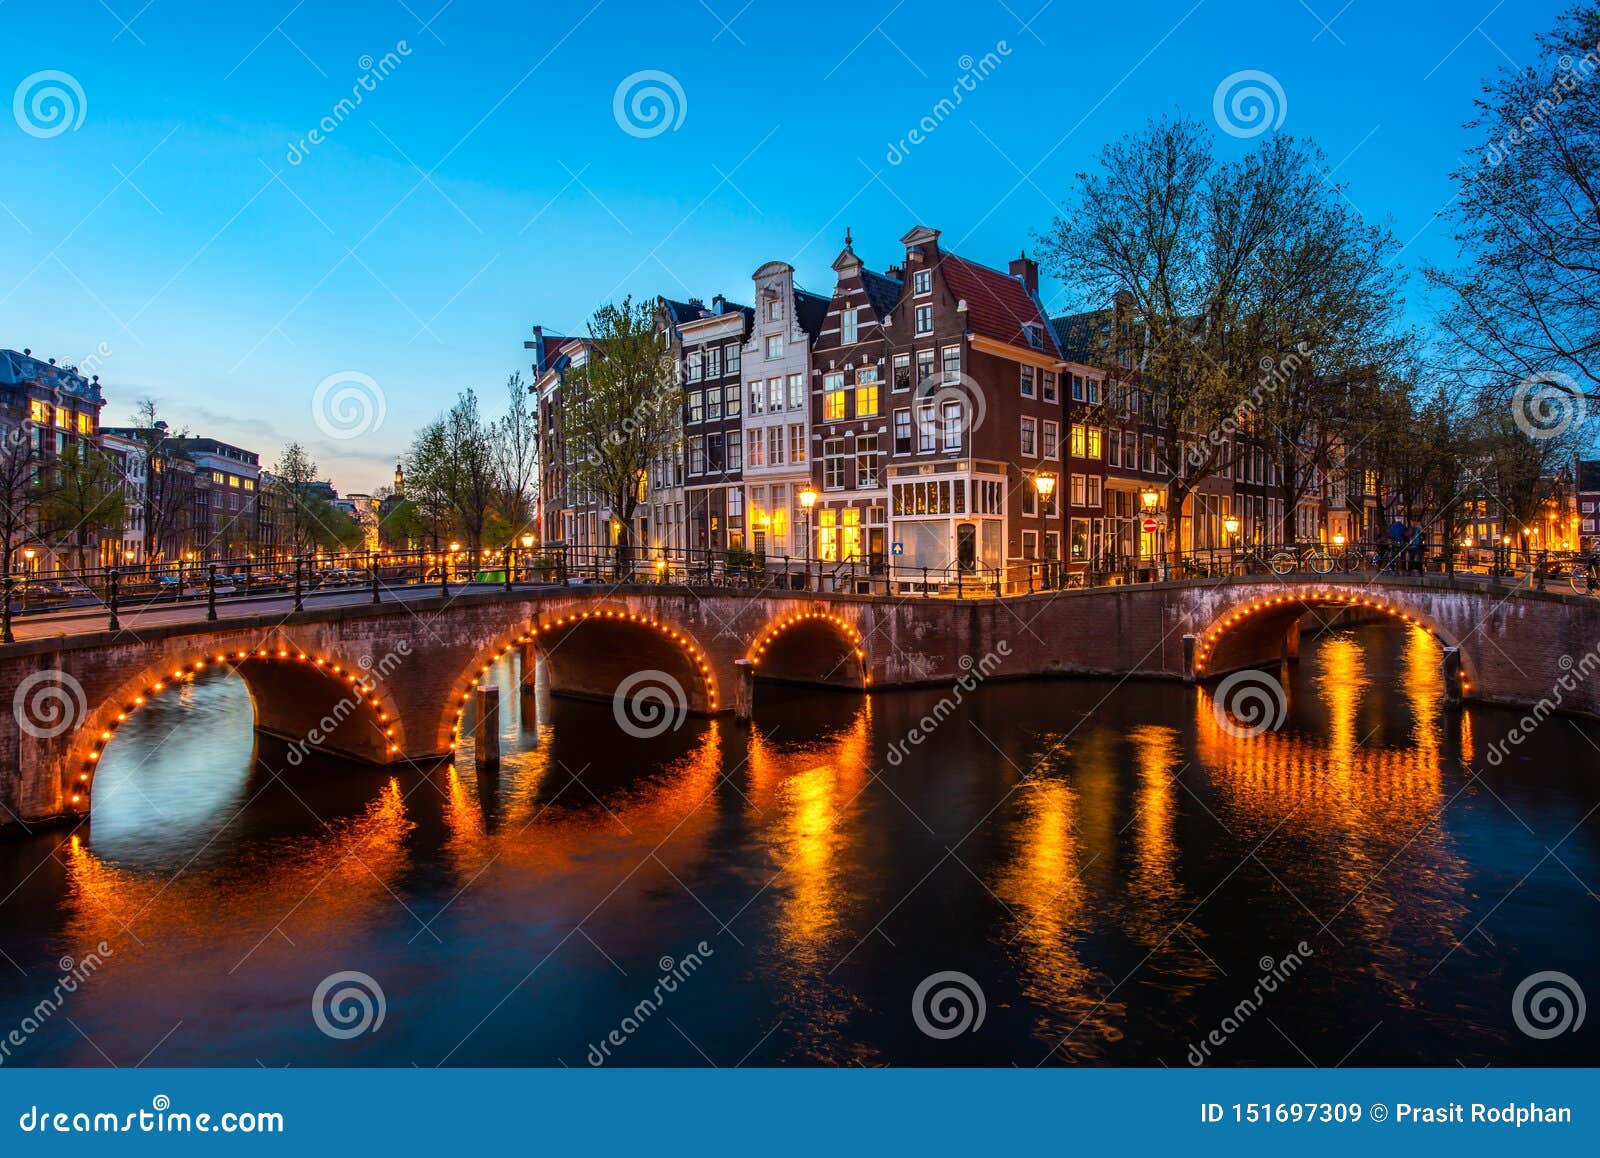 canals of amsterdam at night. amsterdam is the capital and most populous city of the netherlands